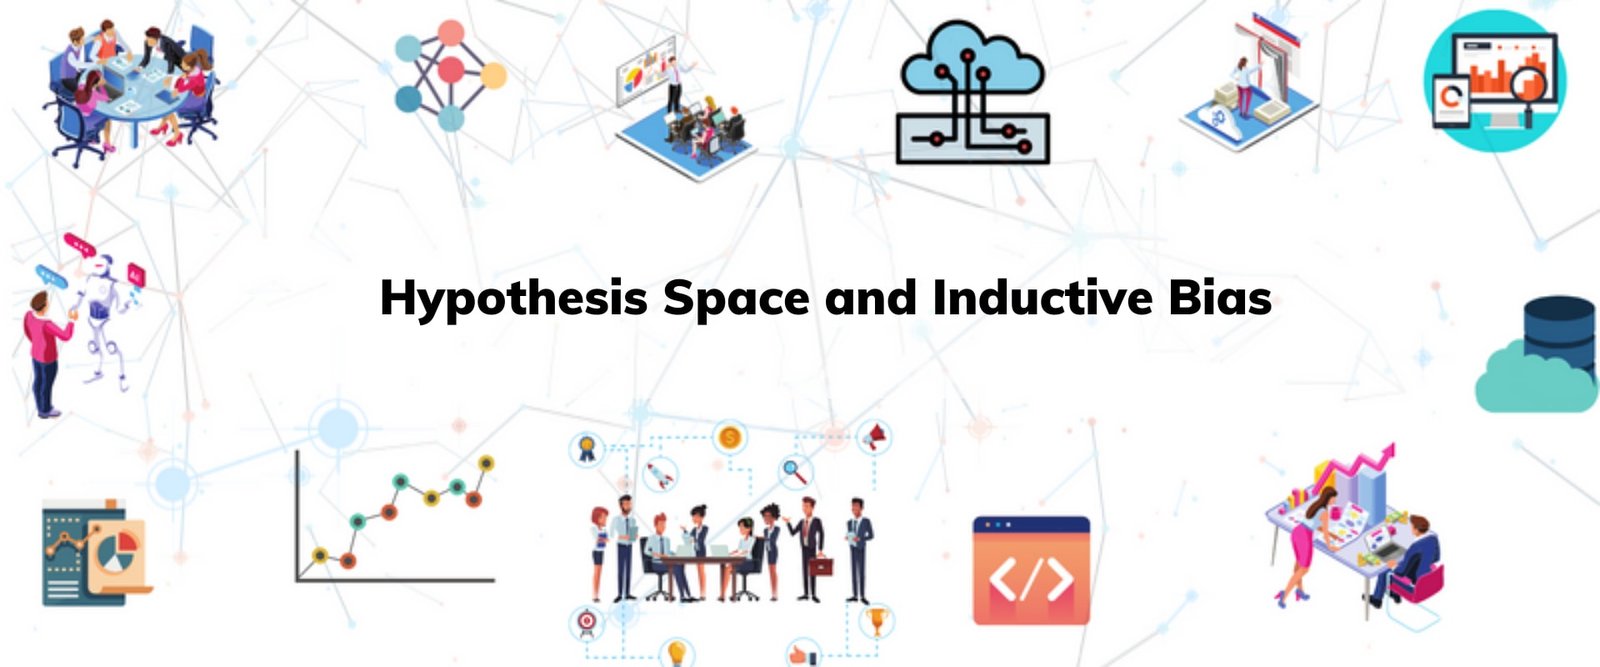 hypothesis space and inductive bias in machine learning ppt